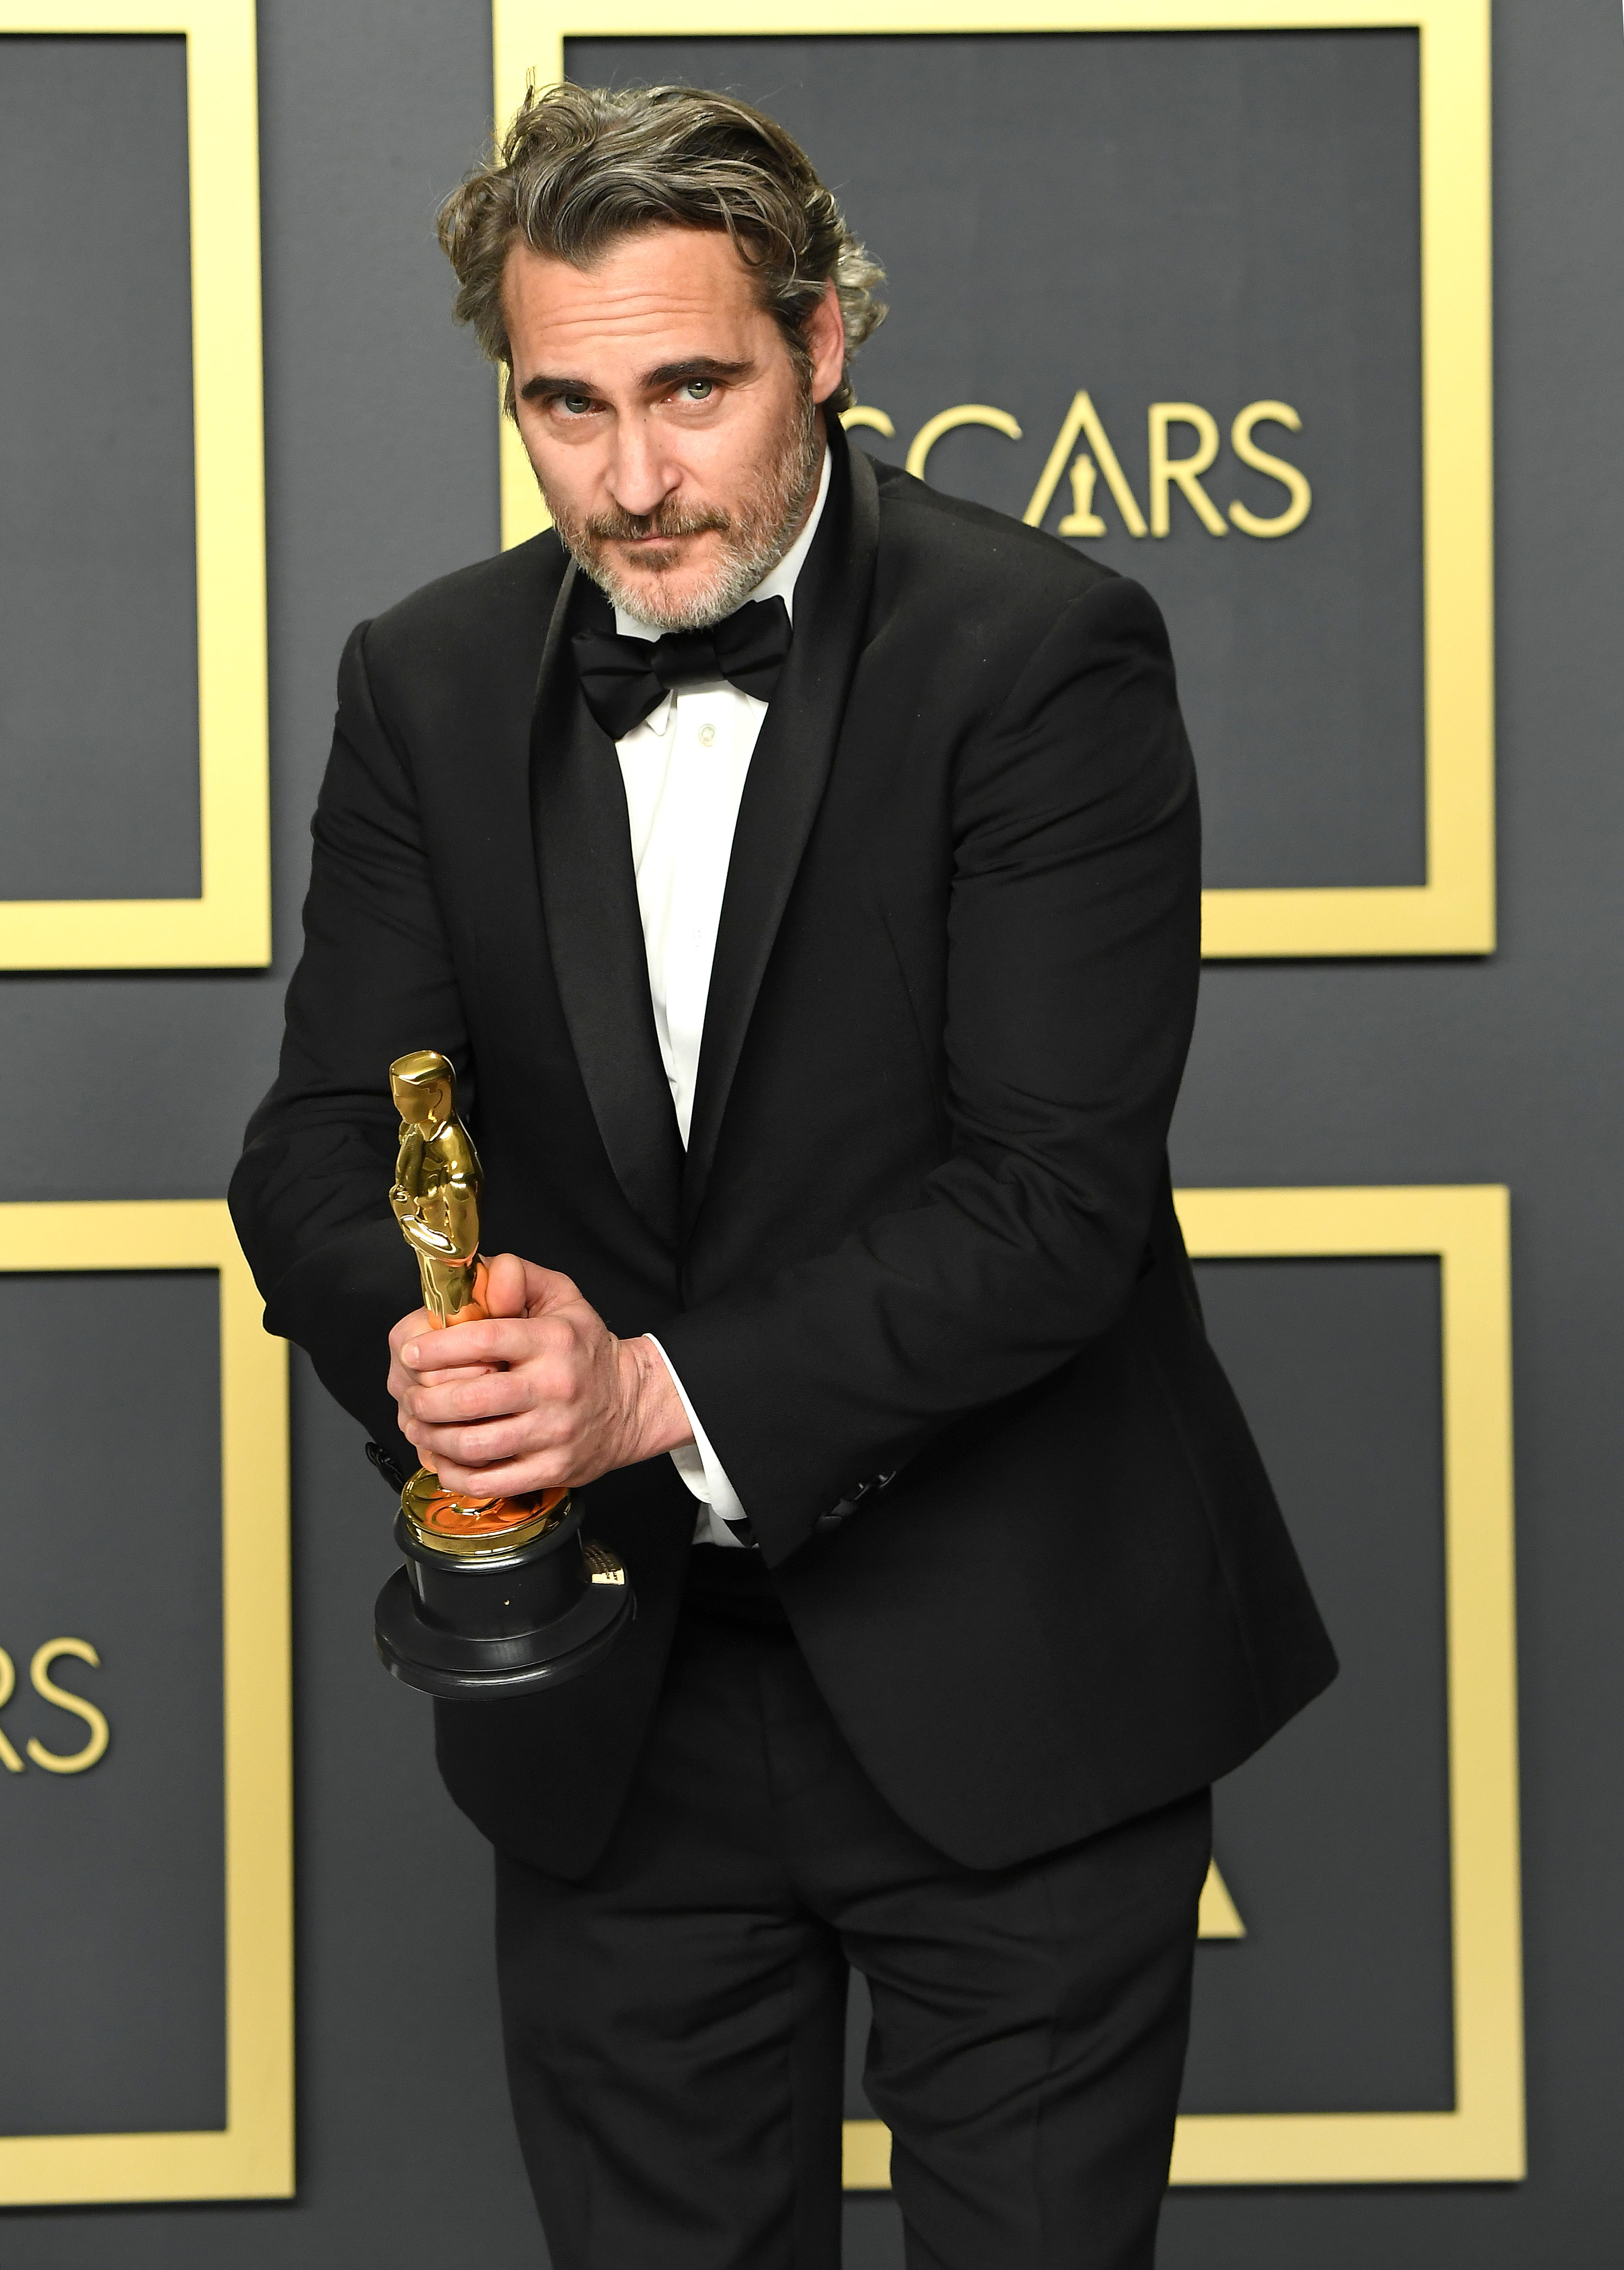 Joaquin Phoenix at 92nd Academy Awards in a suit